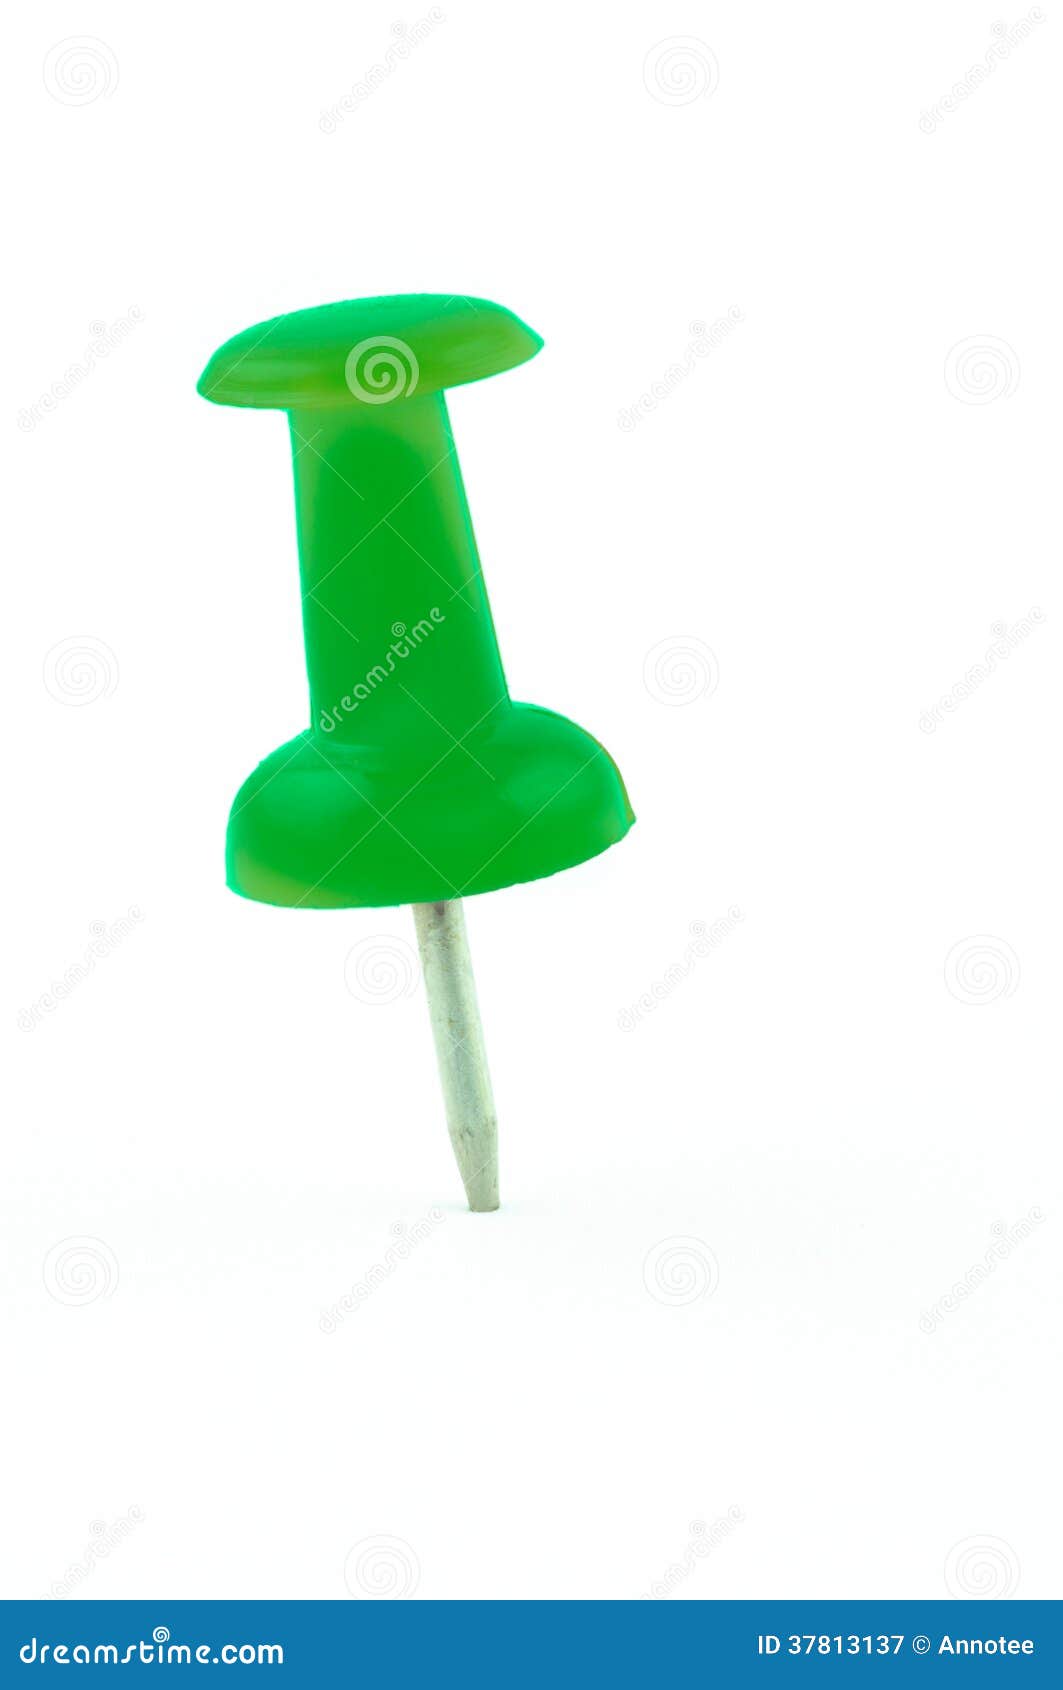 Green pushpin isolated stock image. Image of button, isolated - 37813137